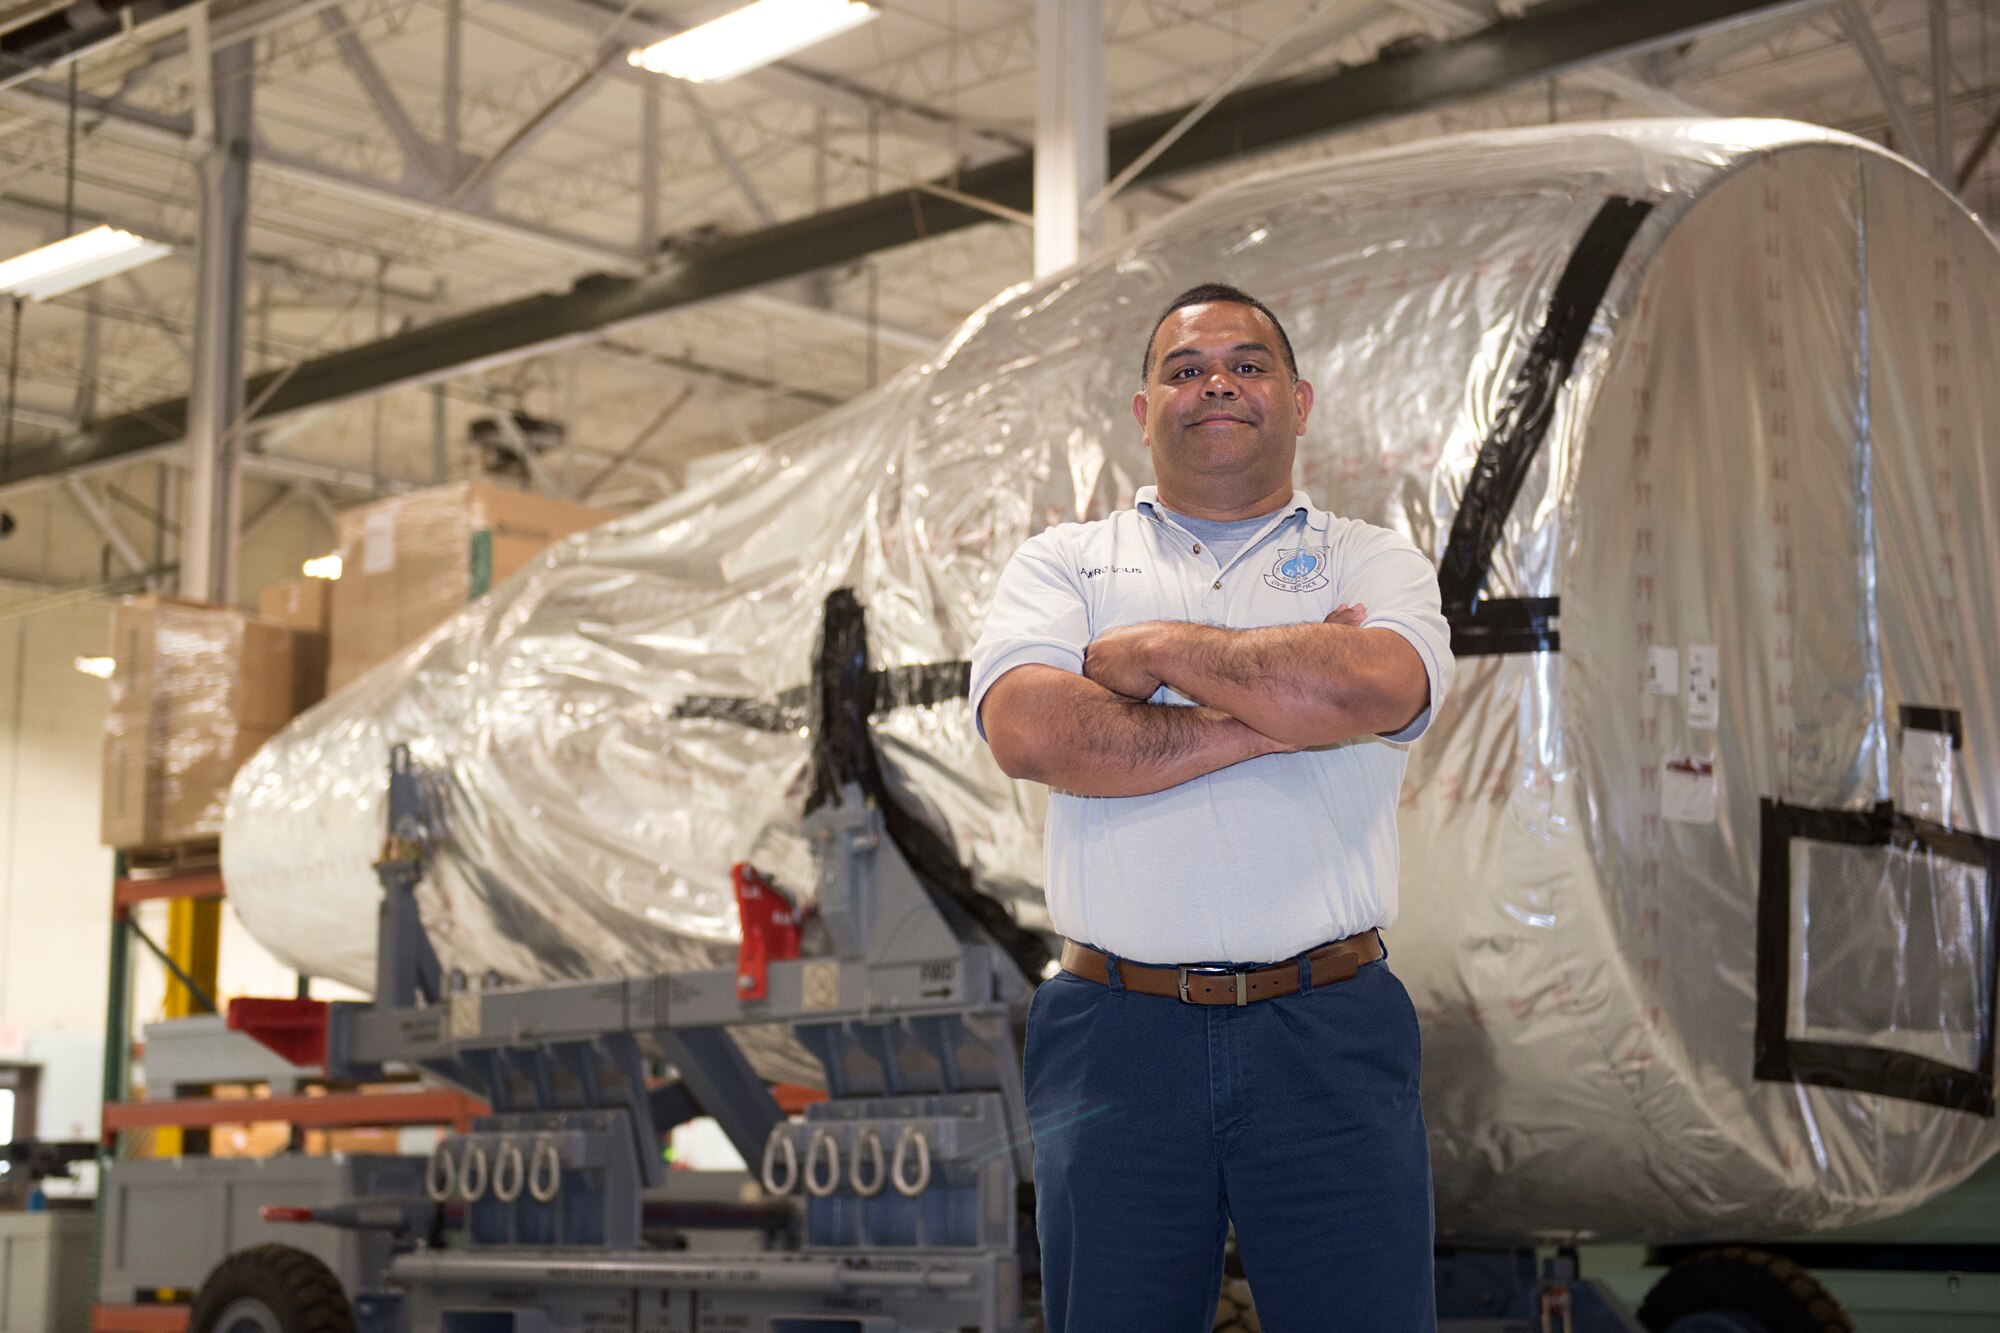 Ramiro Solis, the KC-46 Pegasus programs manager assigned to the 97th Aircraft Maintenance Squadron, stands next to a KC-46 engine, April 20, 2018, at Altus Air Force Base, Okla.